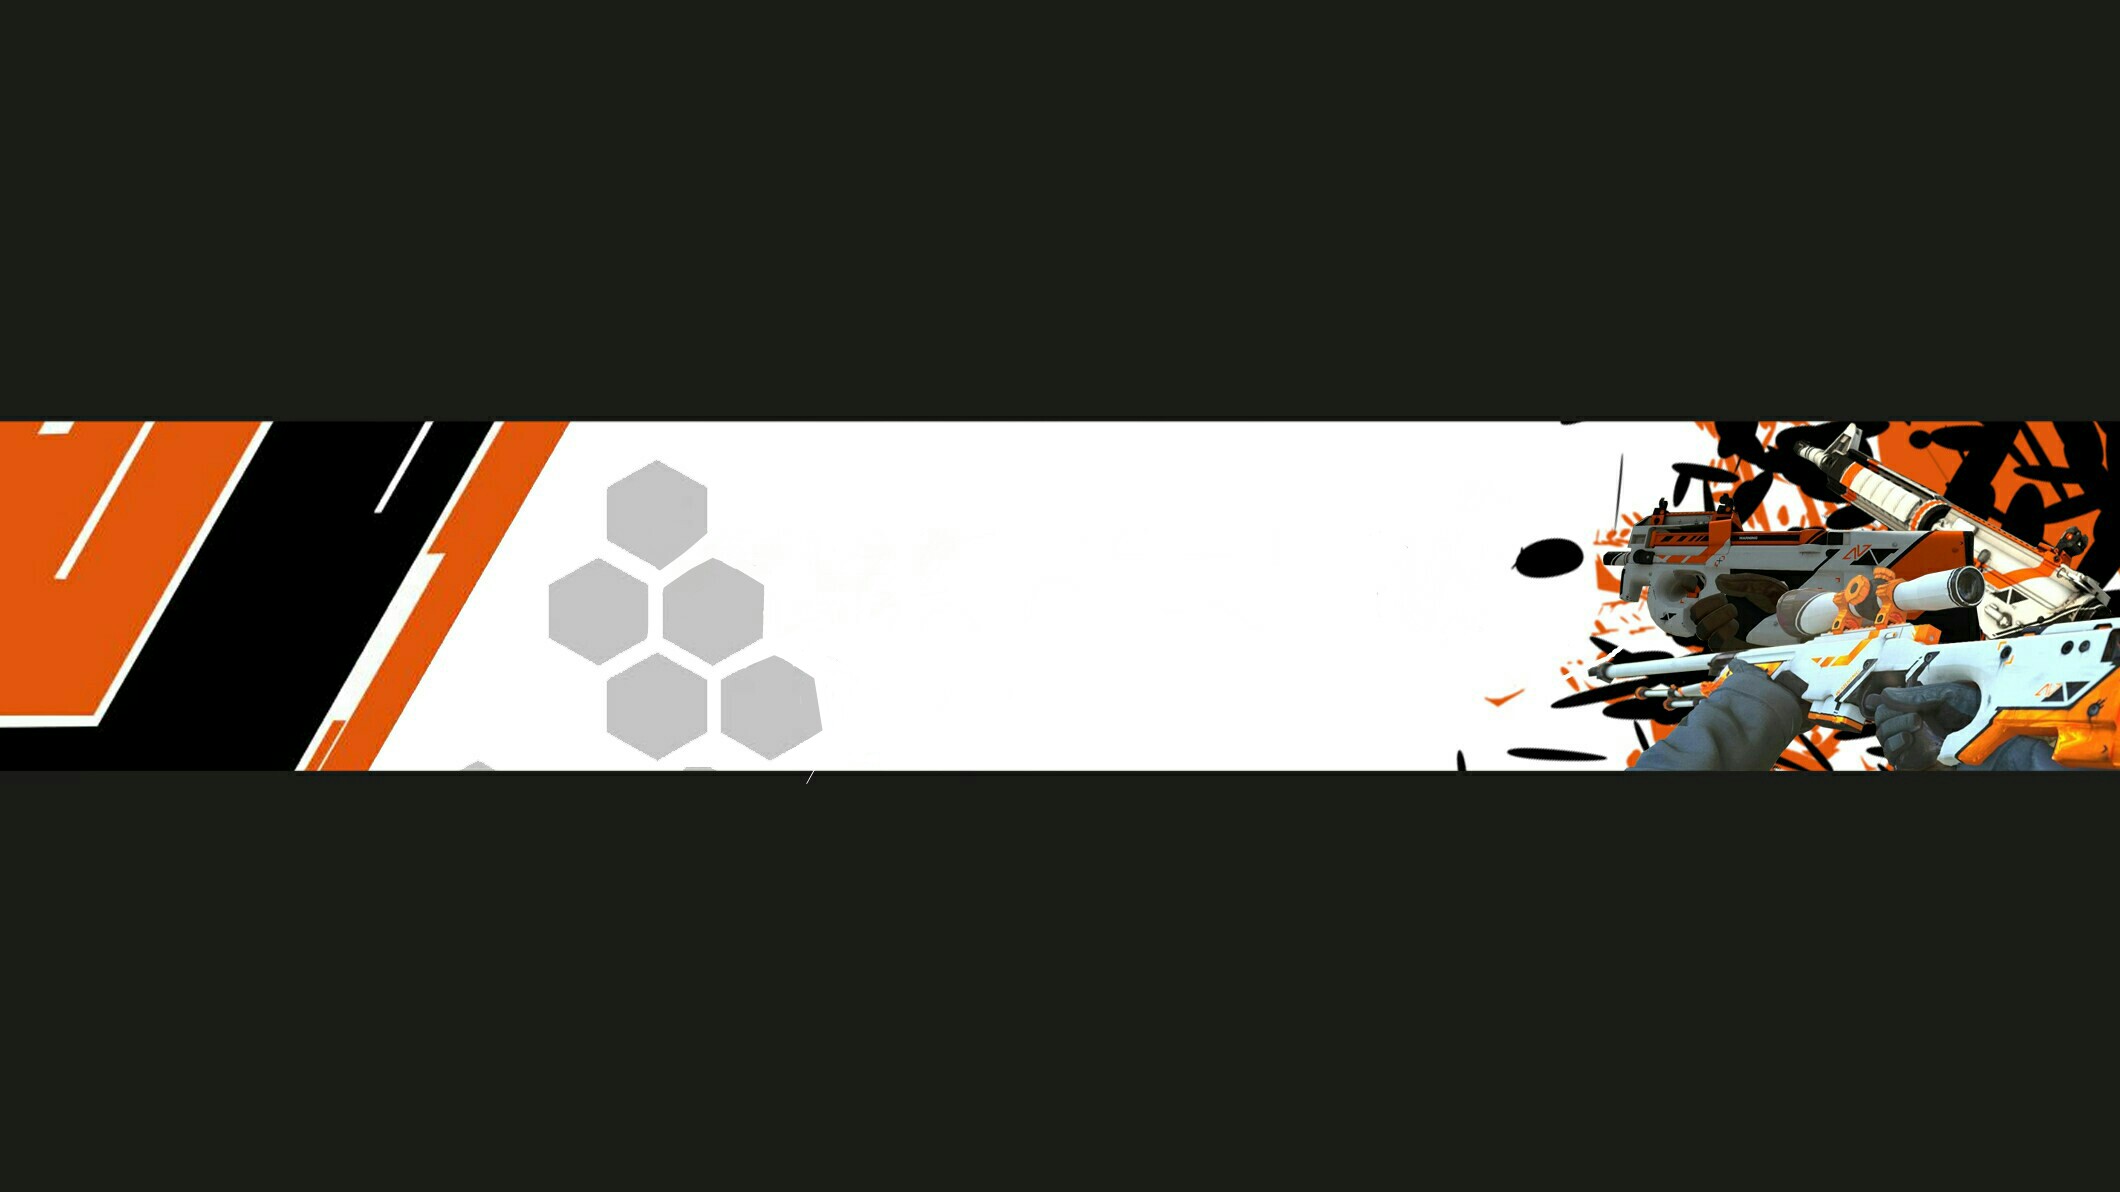 banner youtube csgo freetoedit #banner image by @brutus2